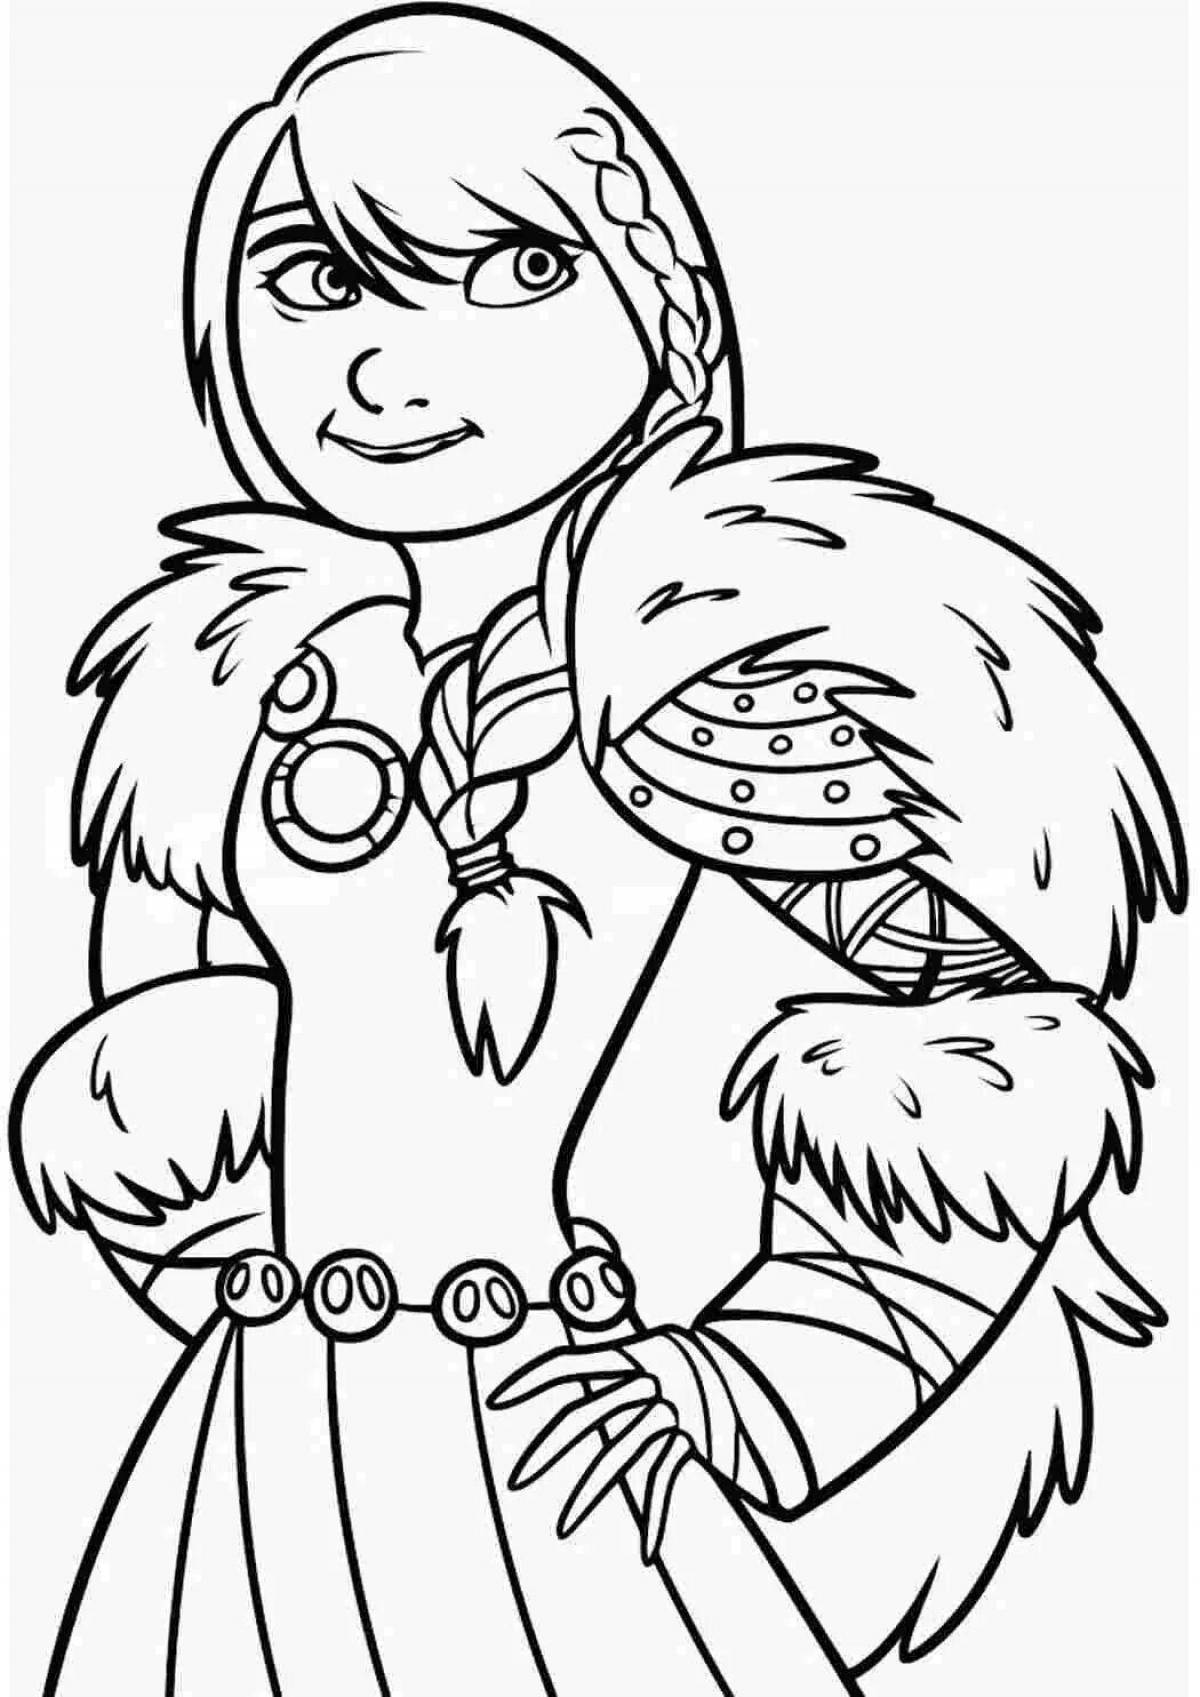 Coloring book dazzling astrid